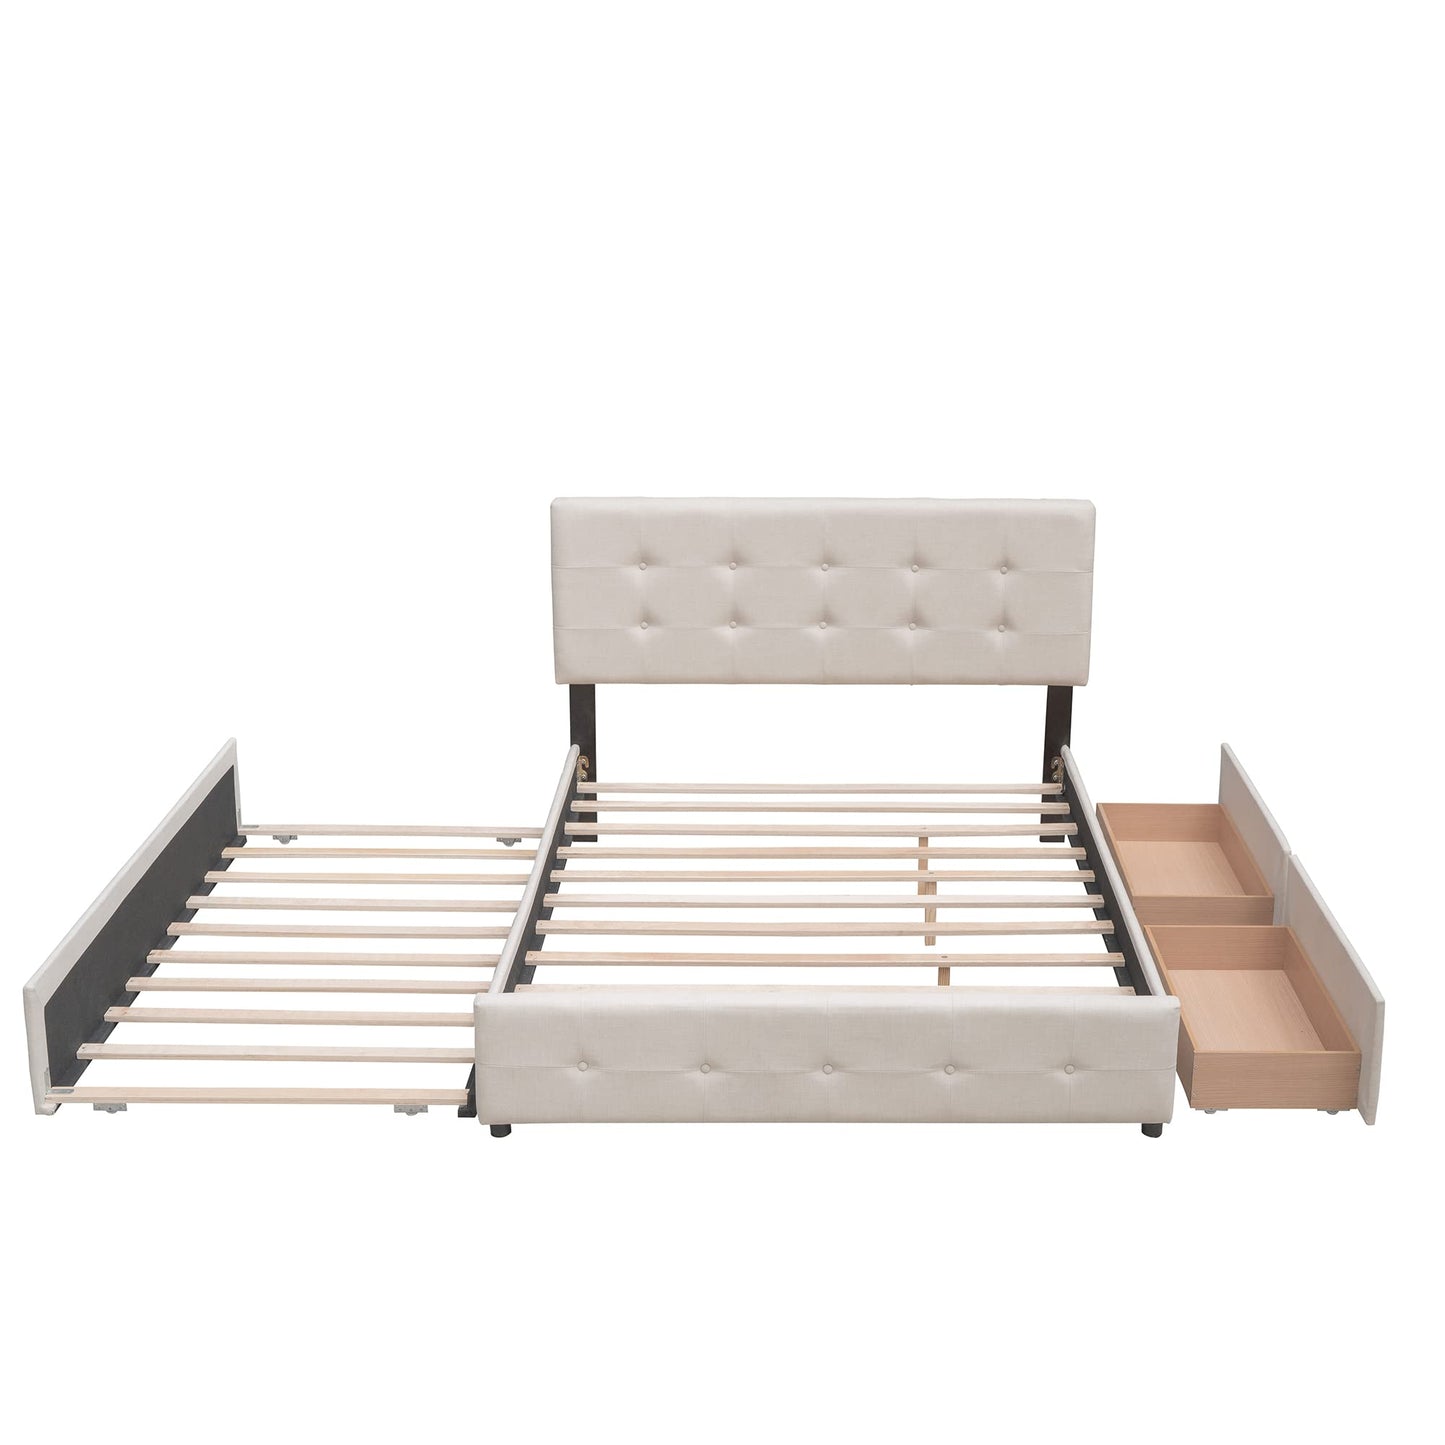 BIADNBZ Queen Size Upholstered Platform Bed with Twin XL Trundle and 2 Storage Drawers Underneath, Linen Fabric Low Bedframe with Wood Slat, for Bedroom, Dark Beige